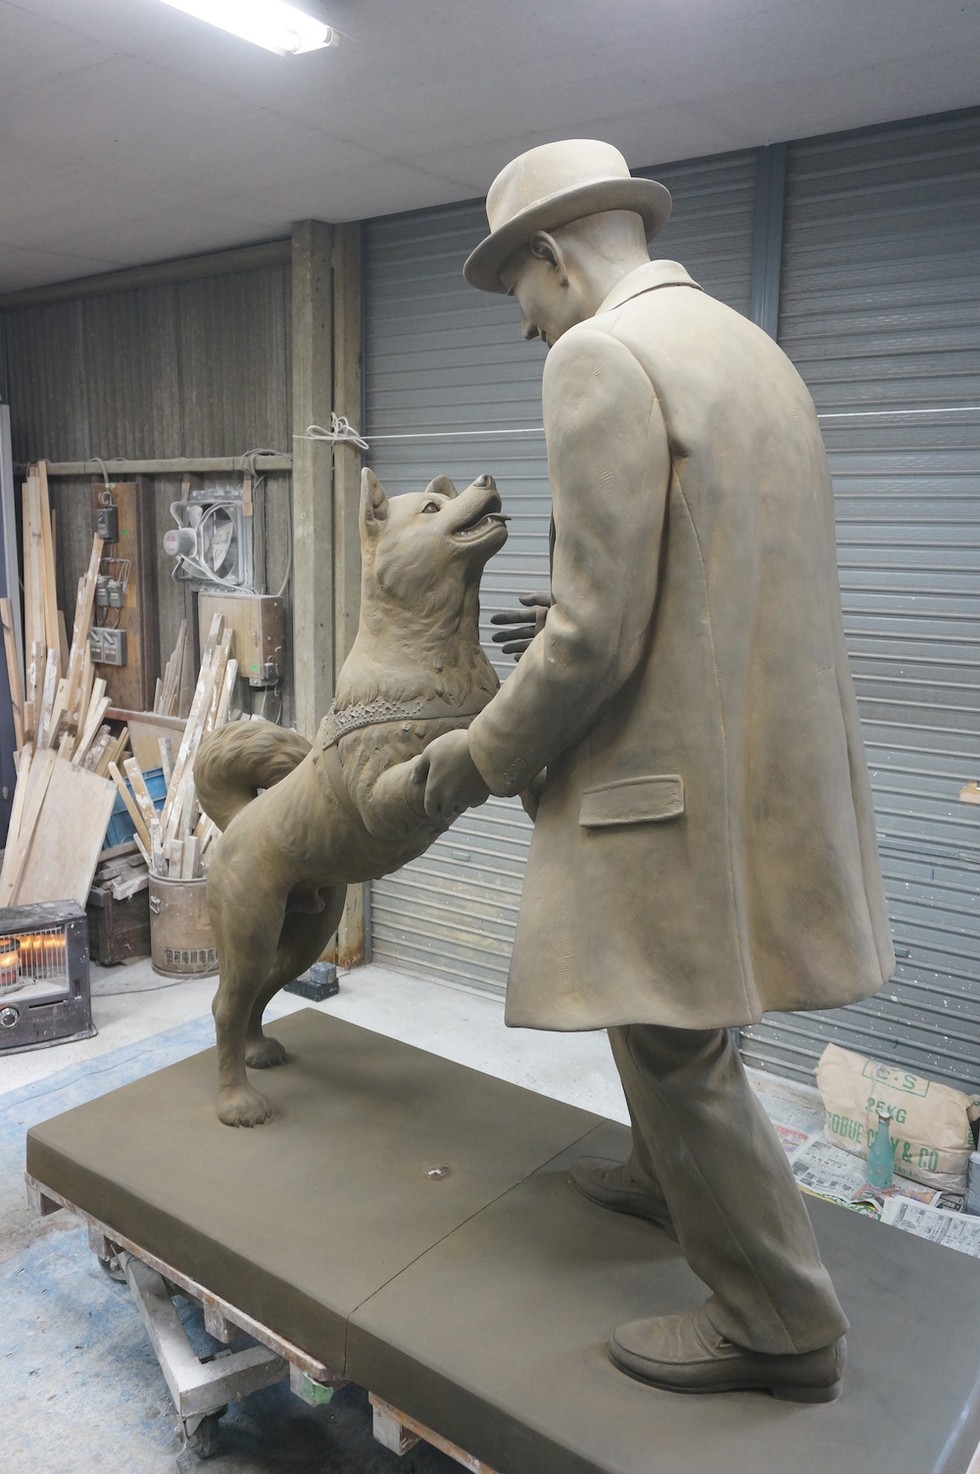 hachi a dogs tale who acted the dog